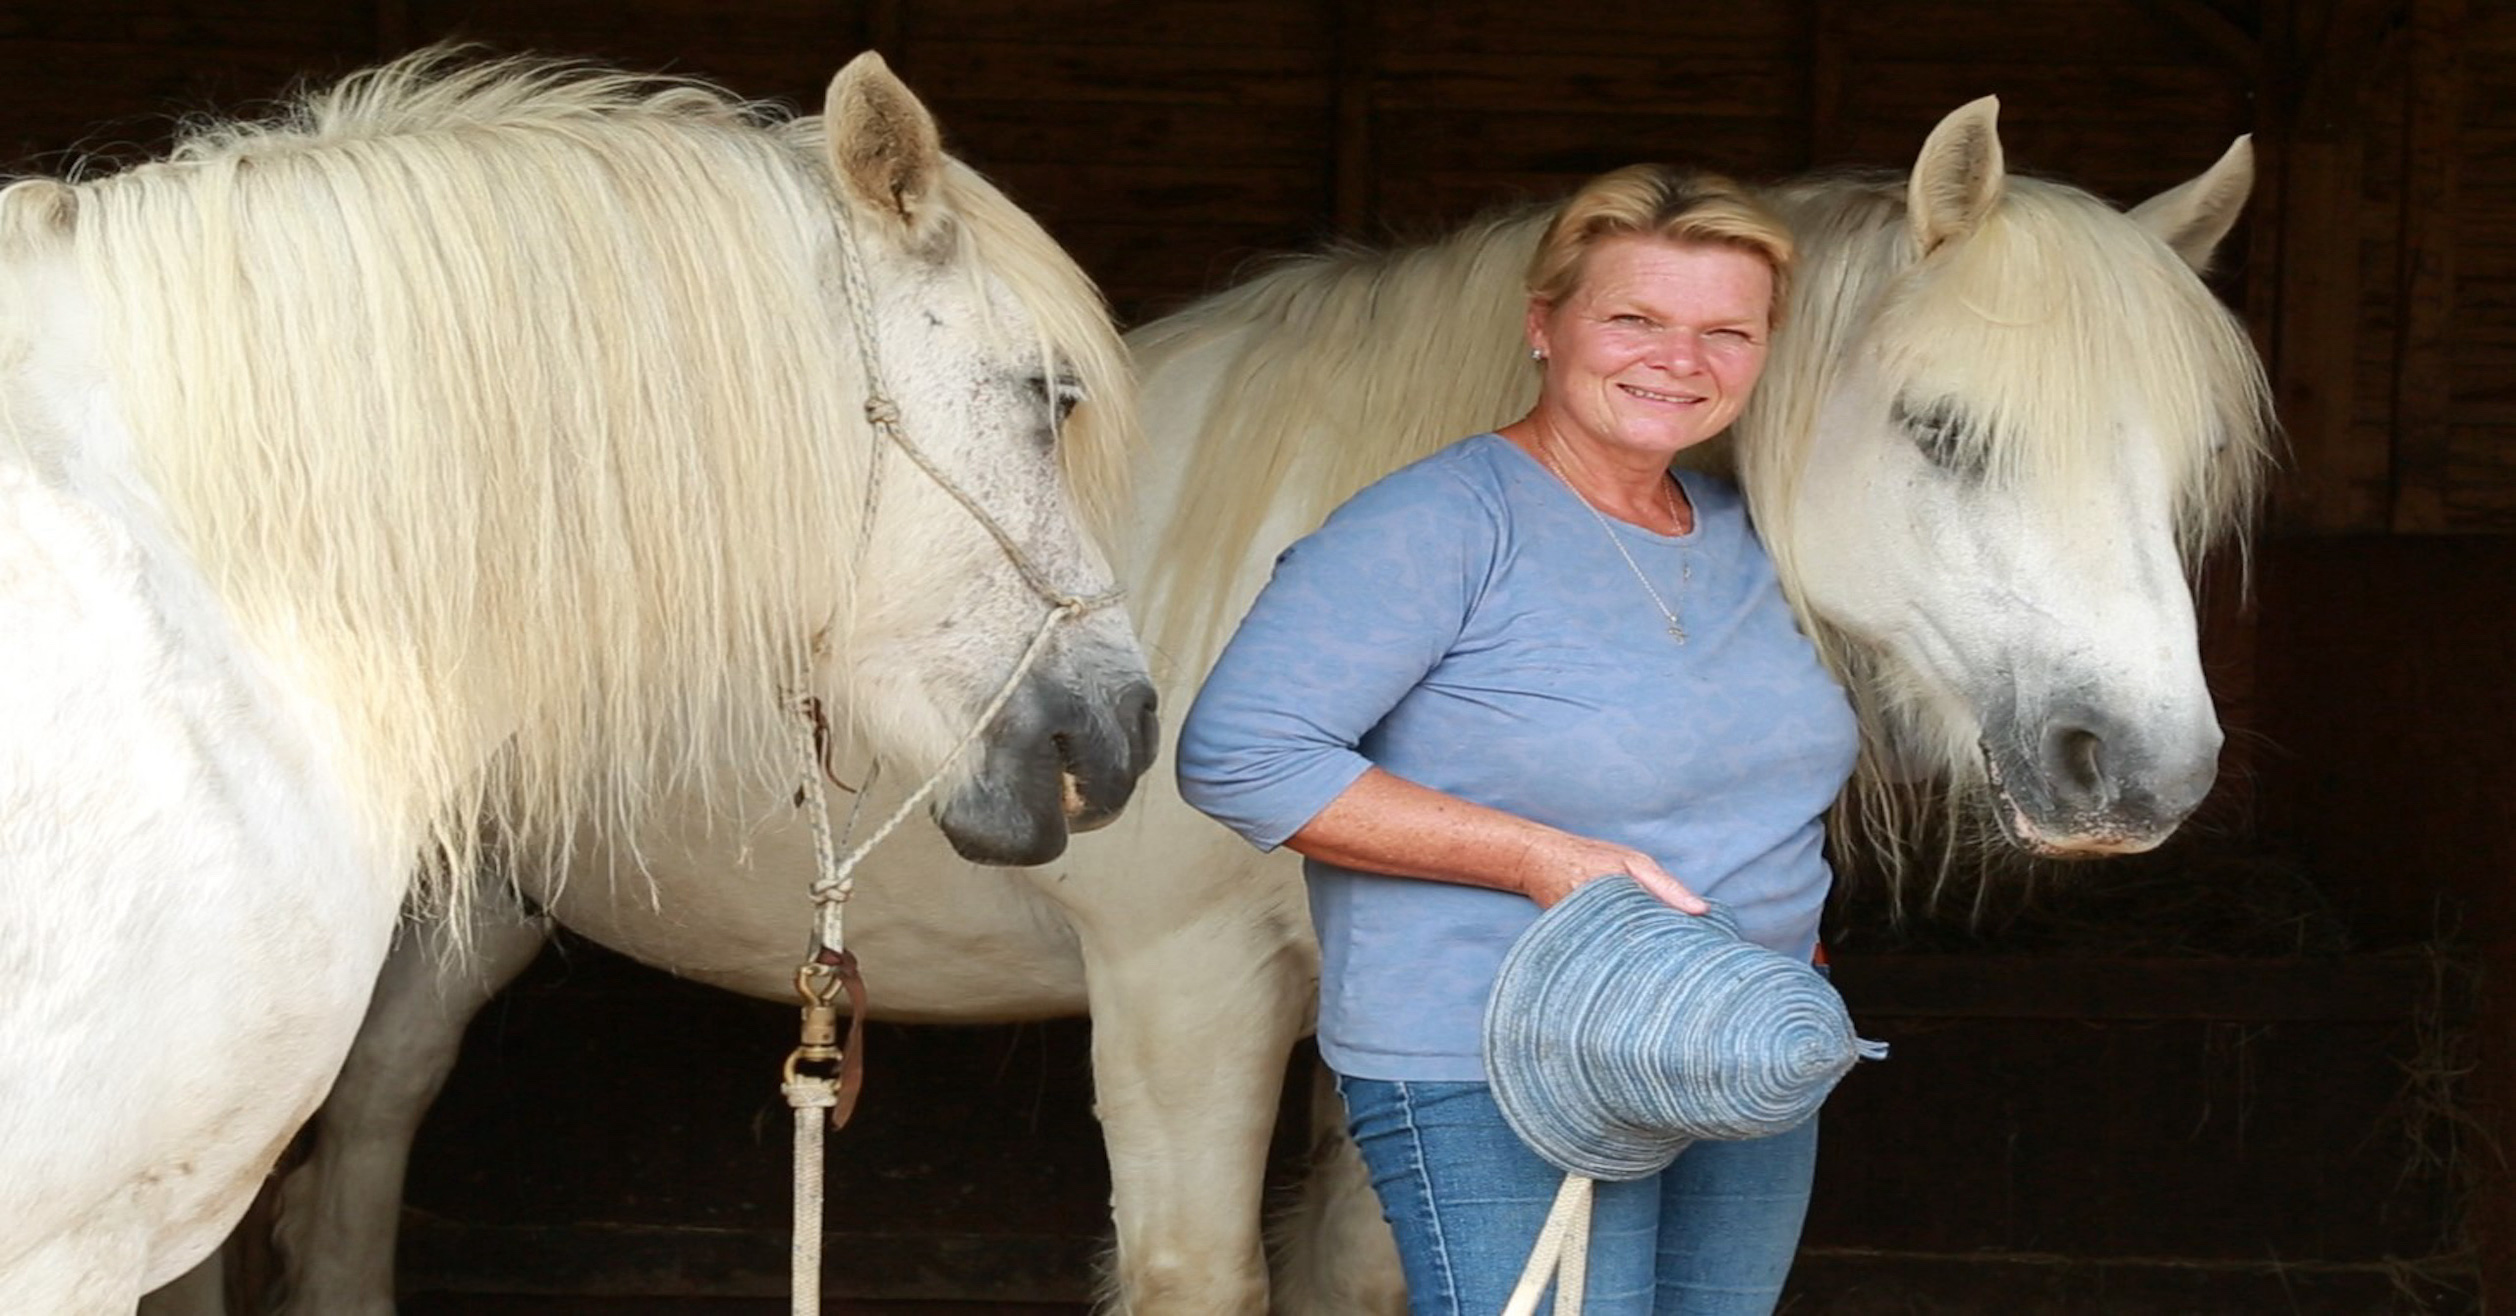 Heart-to-Hand-Cathy-with-her-Highland-Ponies-2516x1316-copy-5950.jpg